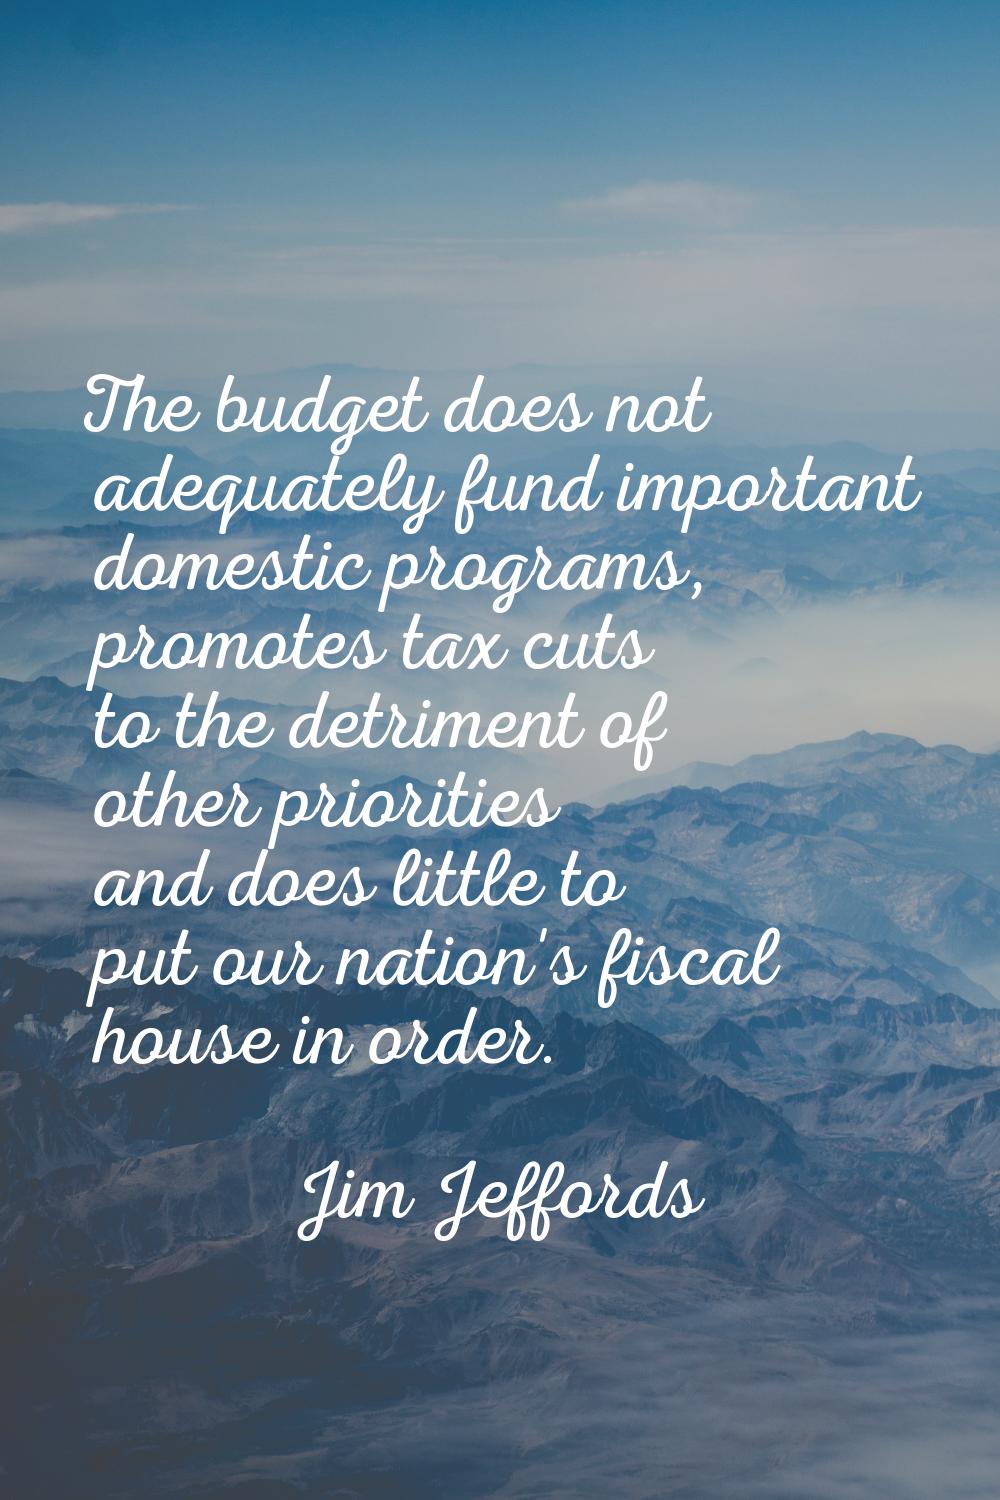 The budget does not adequately fund important domestic programs, promotes tax cuts to the detriment